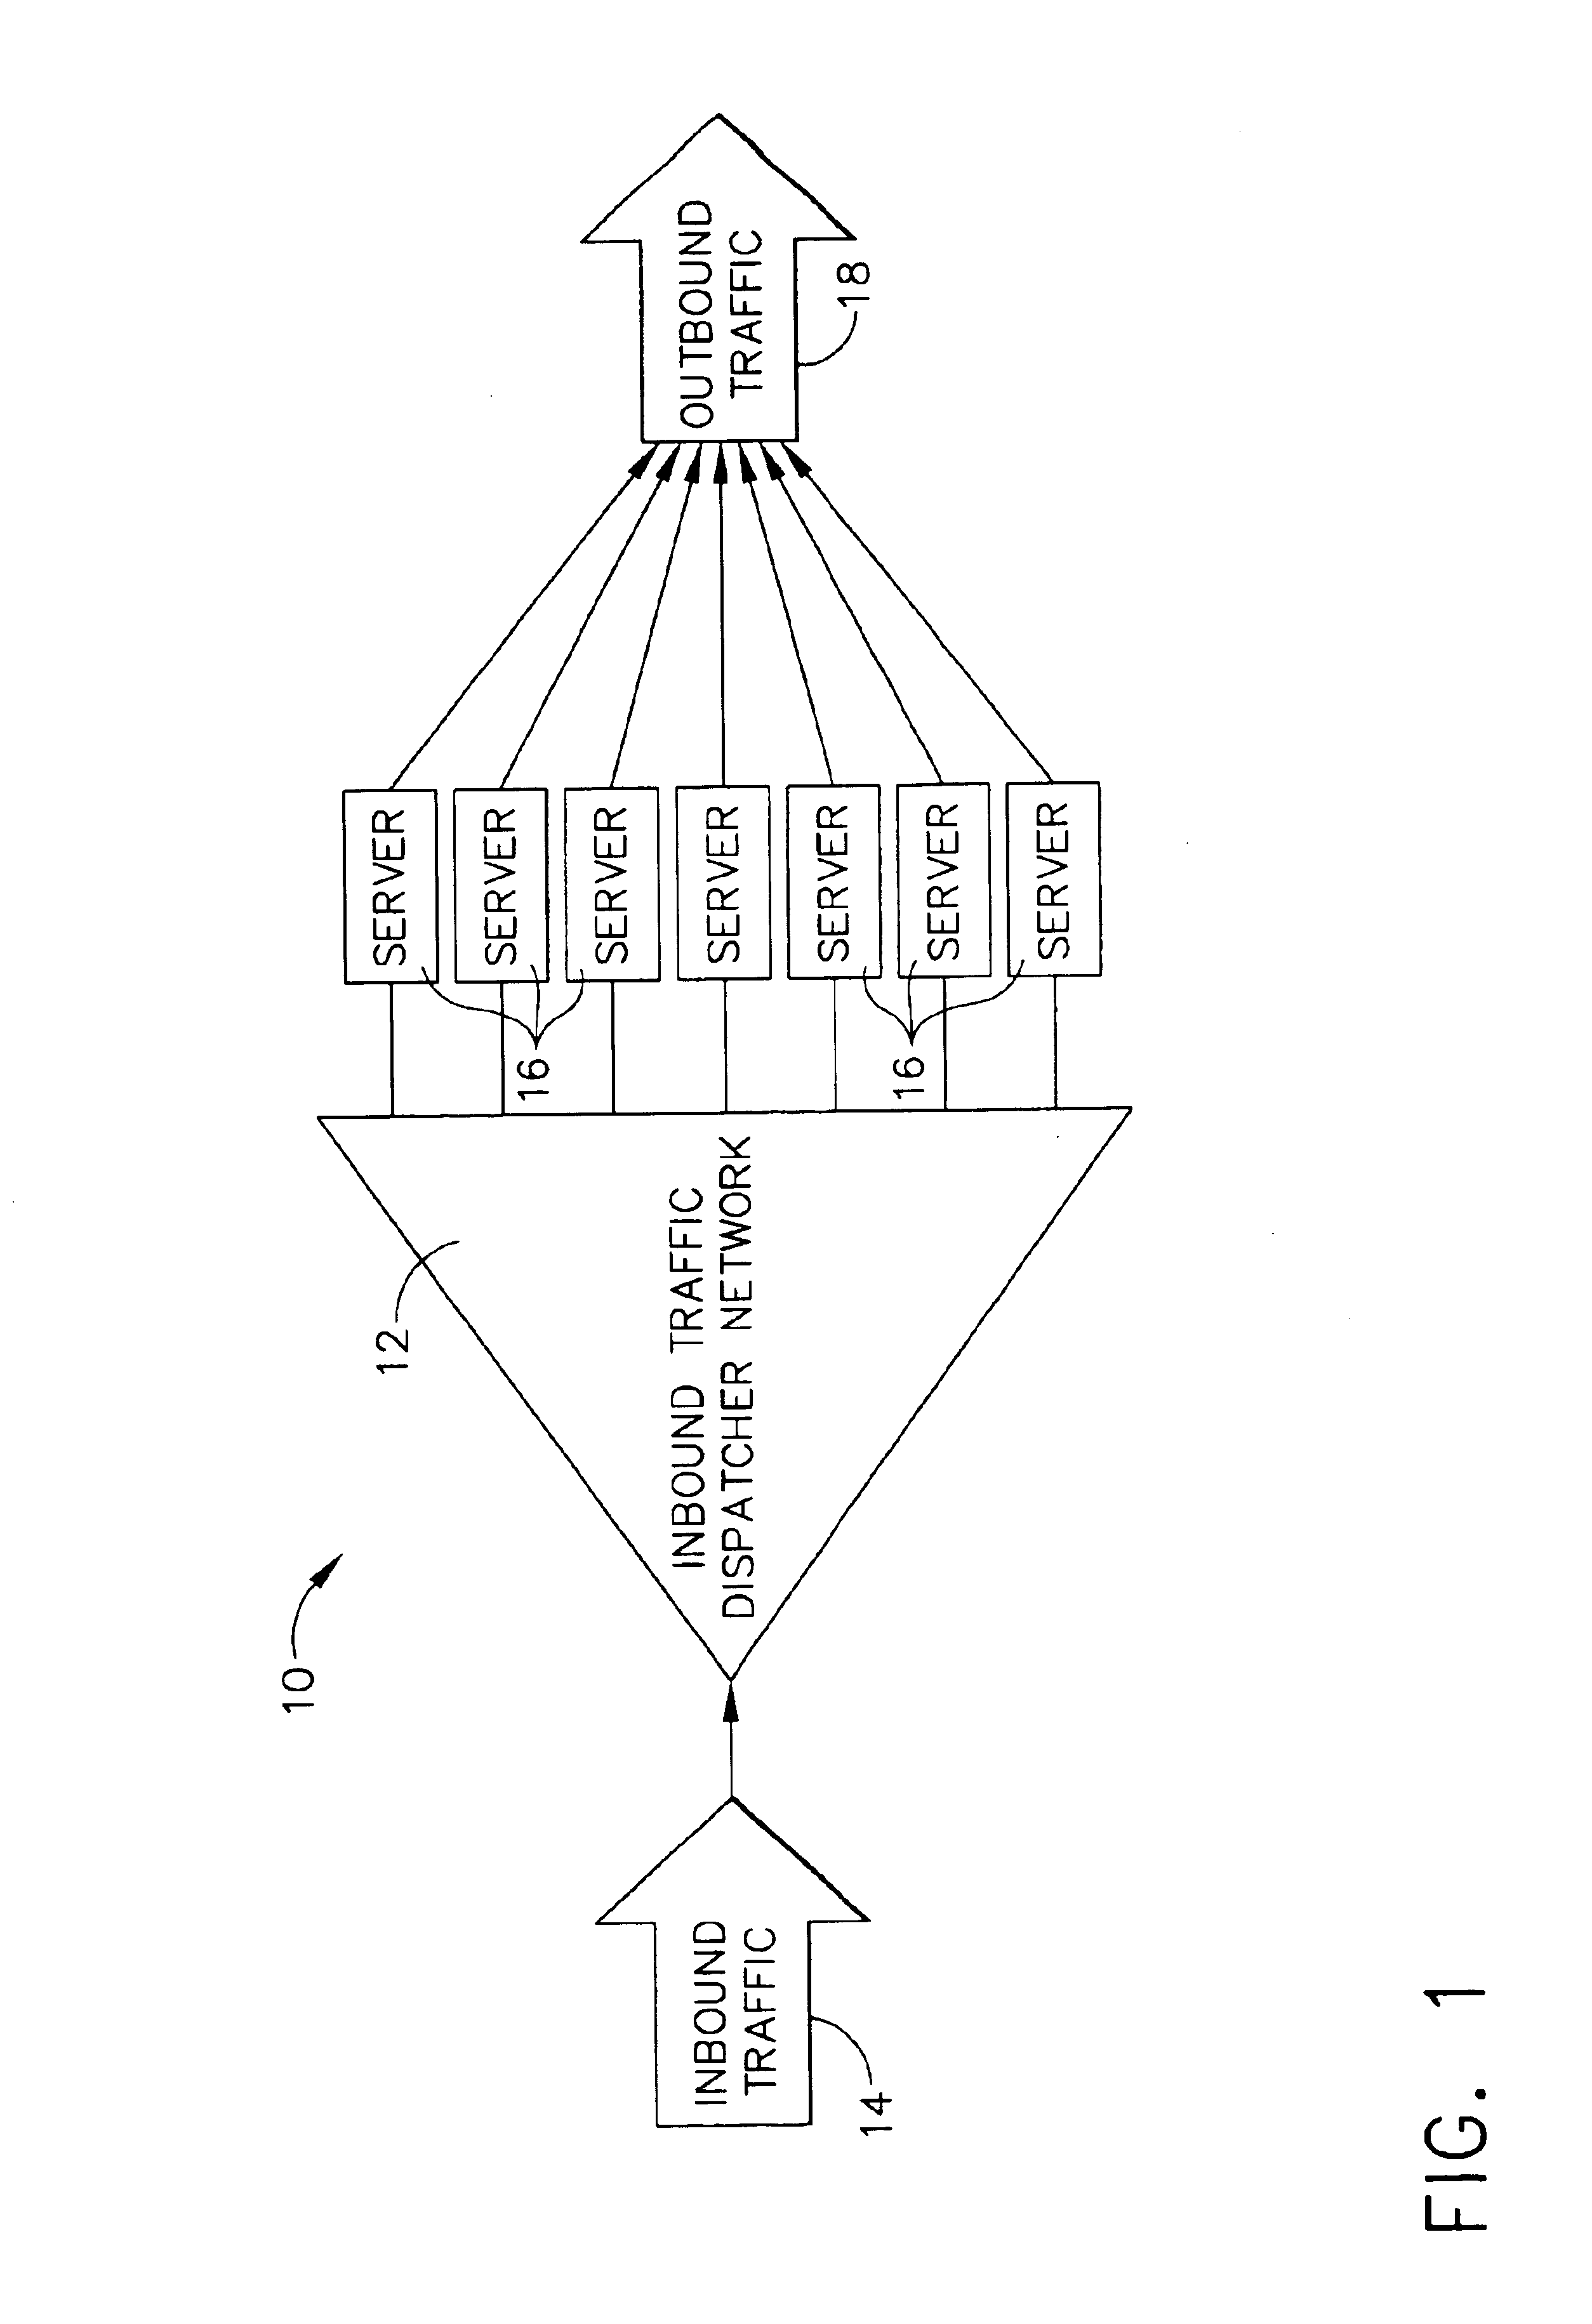 Highly scalable system and method of regulating internet traffic to server farm to support (min,max) bandwidth usage-based service level agreements